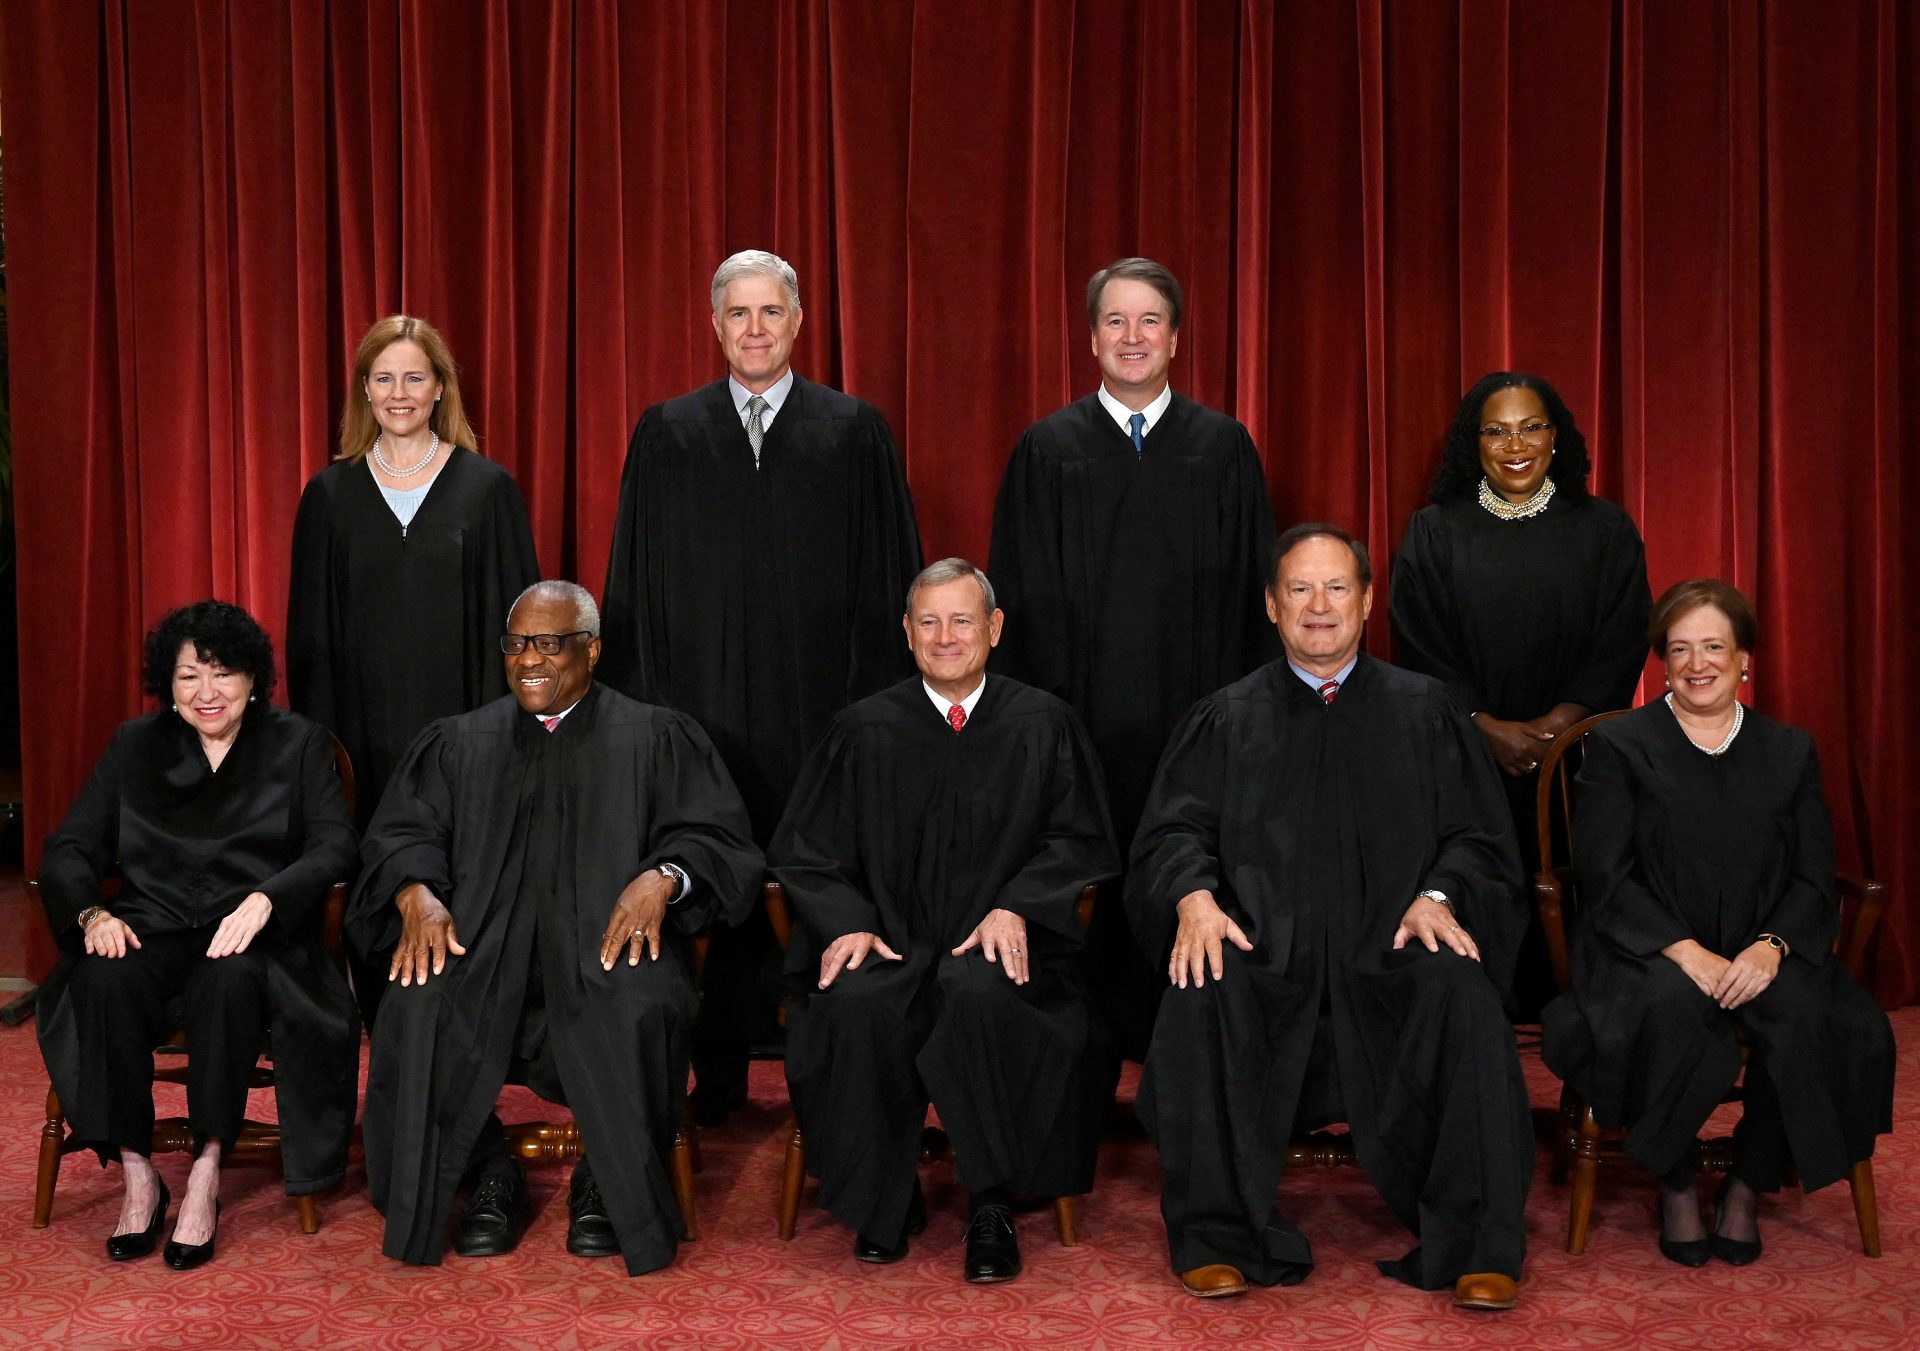 How Wealthy are the U.S. Supreme Court Justices? CPA Practice Advisor